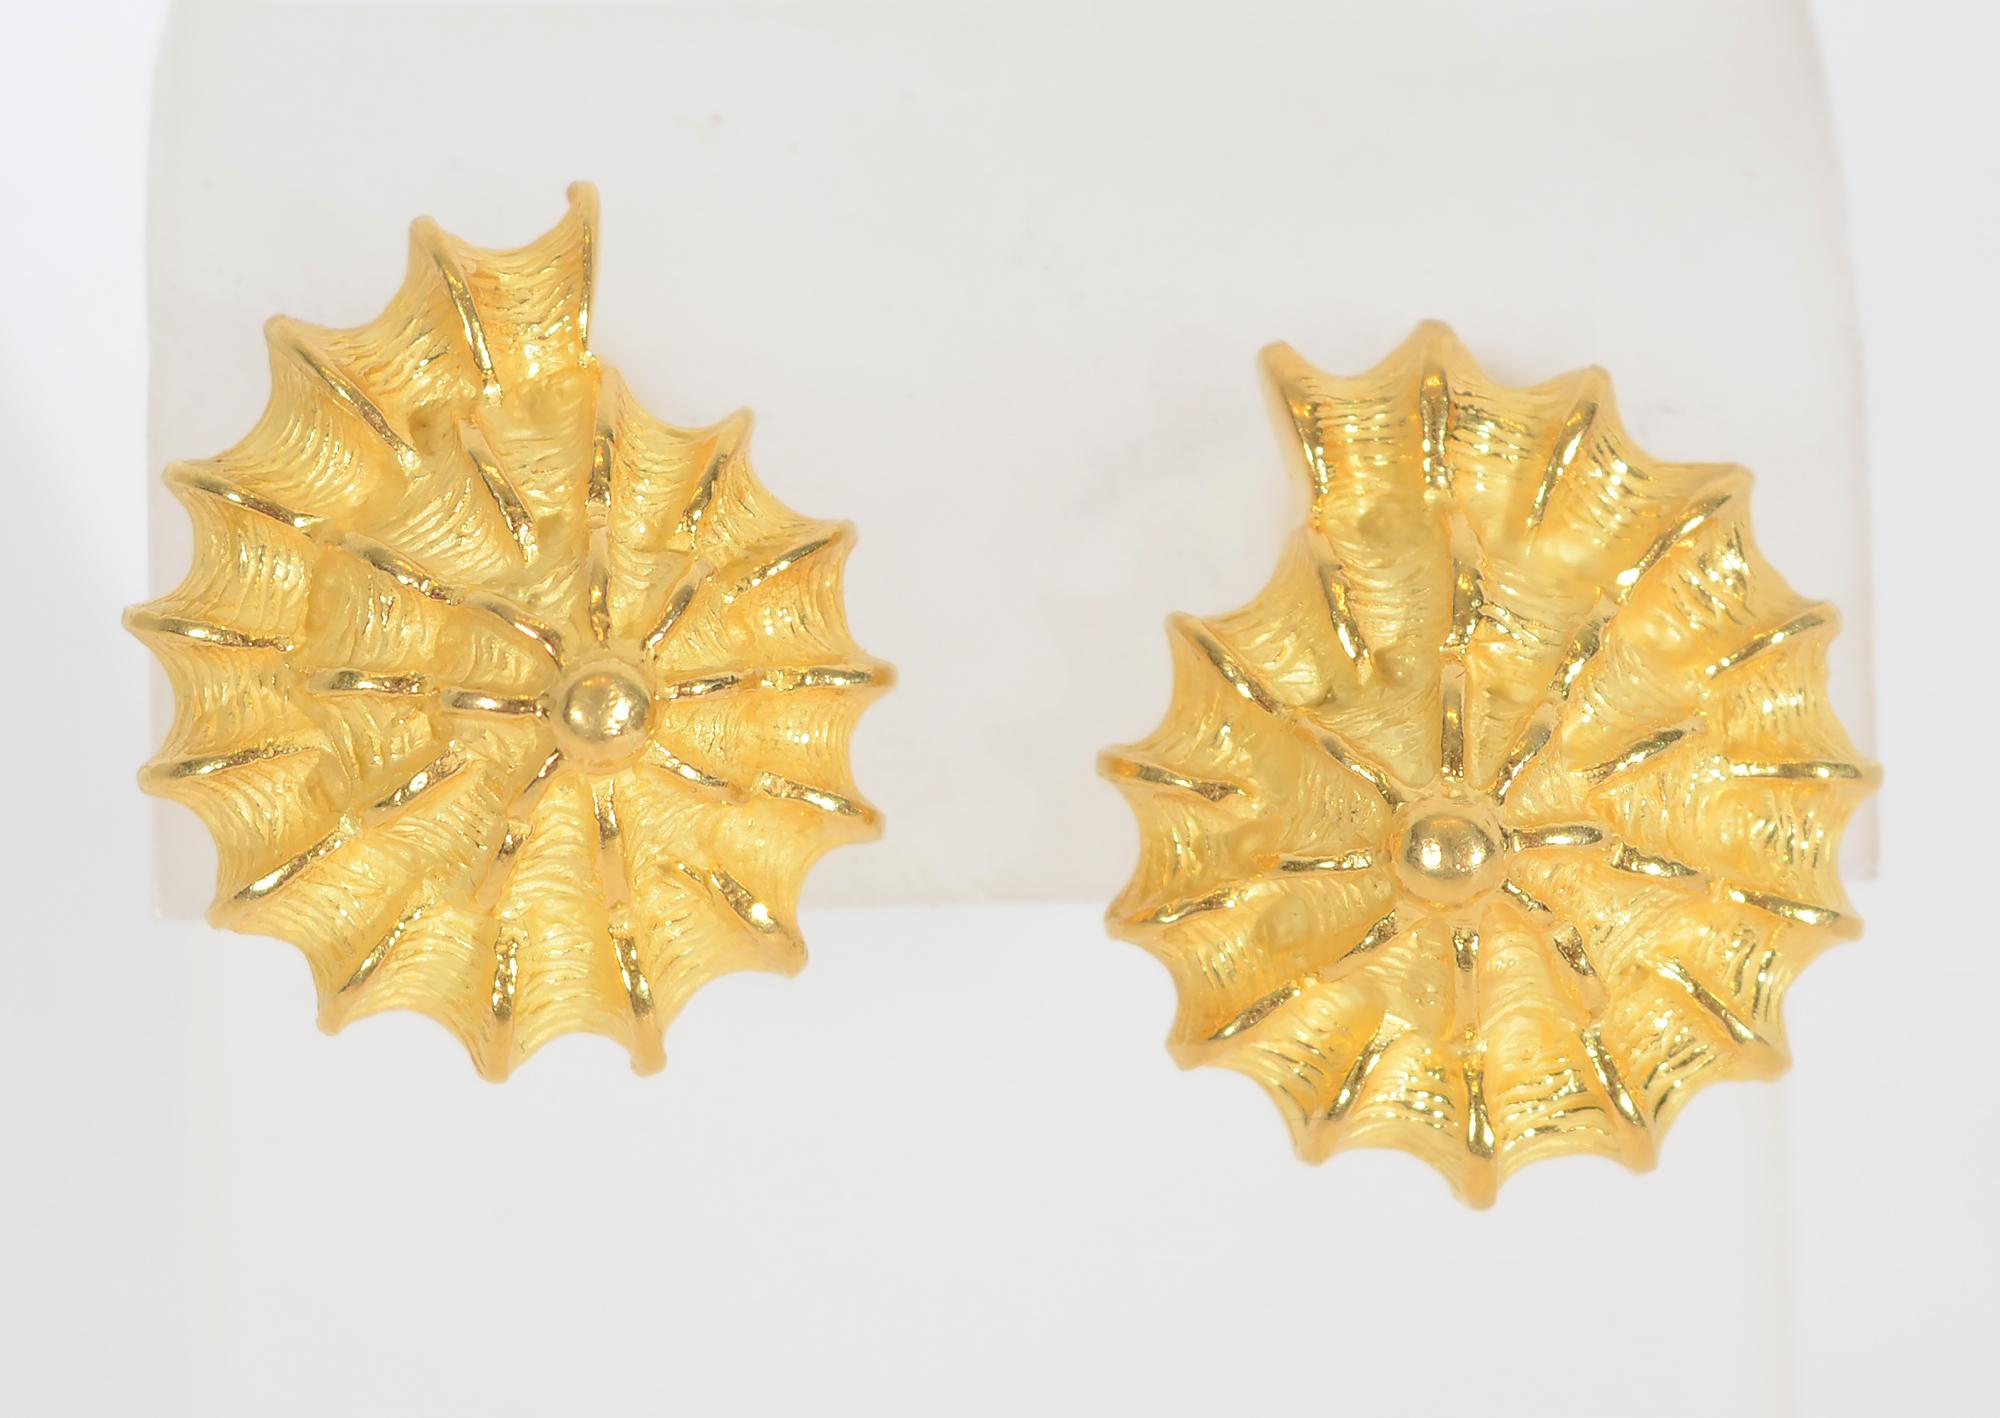 Beautifully sculptured and textured shell earrings by Valentin Magro. They are 18 karat gold with post and clip backs.
They are still in production and are sold by Magro for $5035.